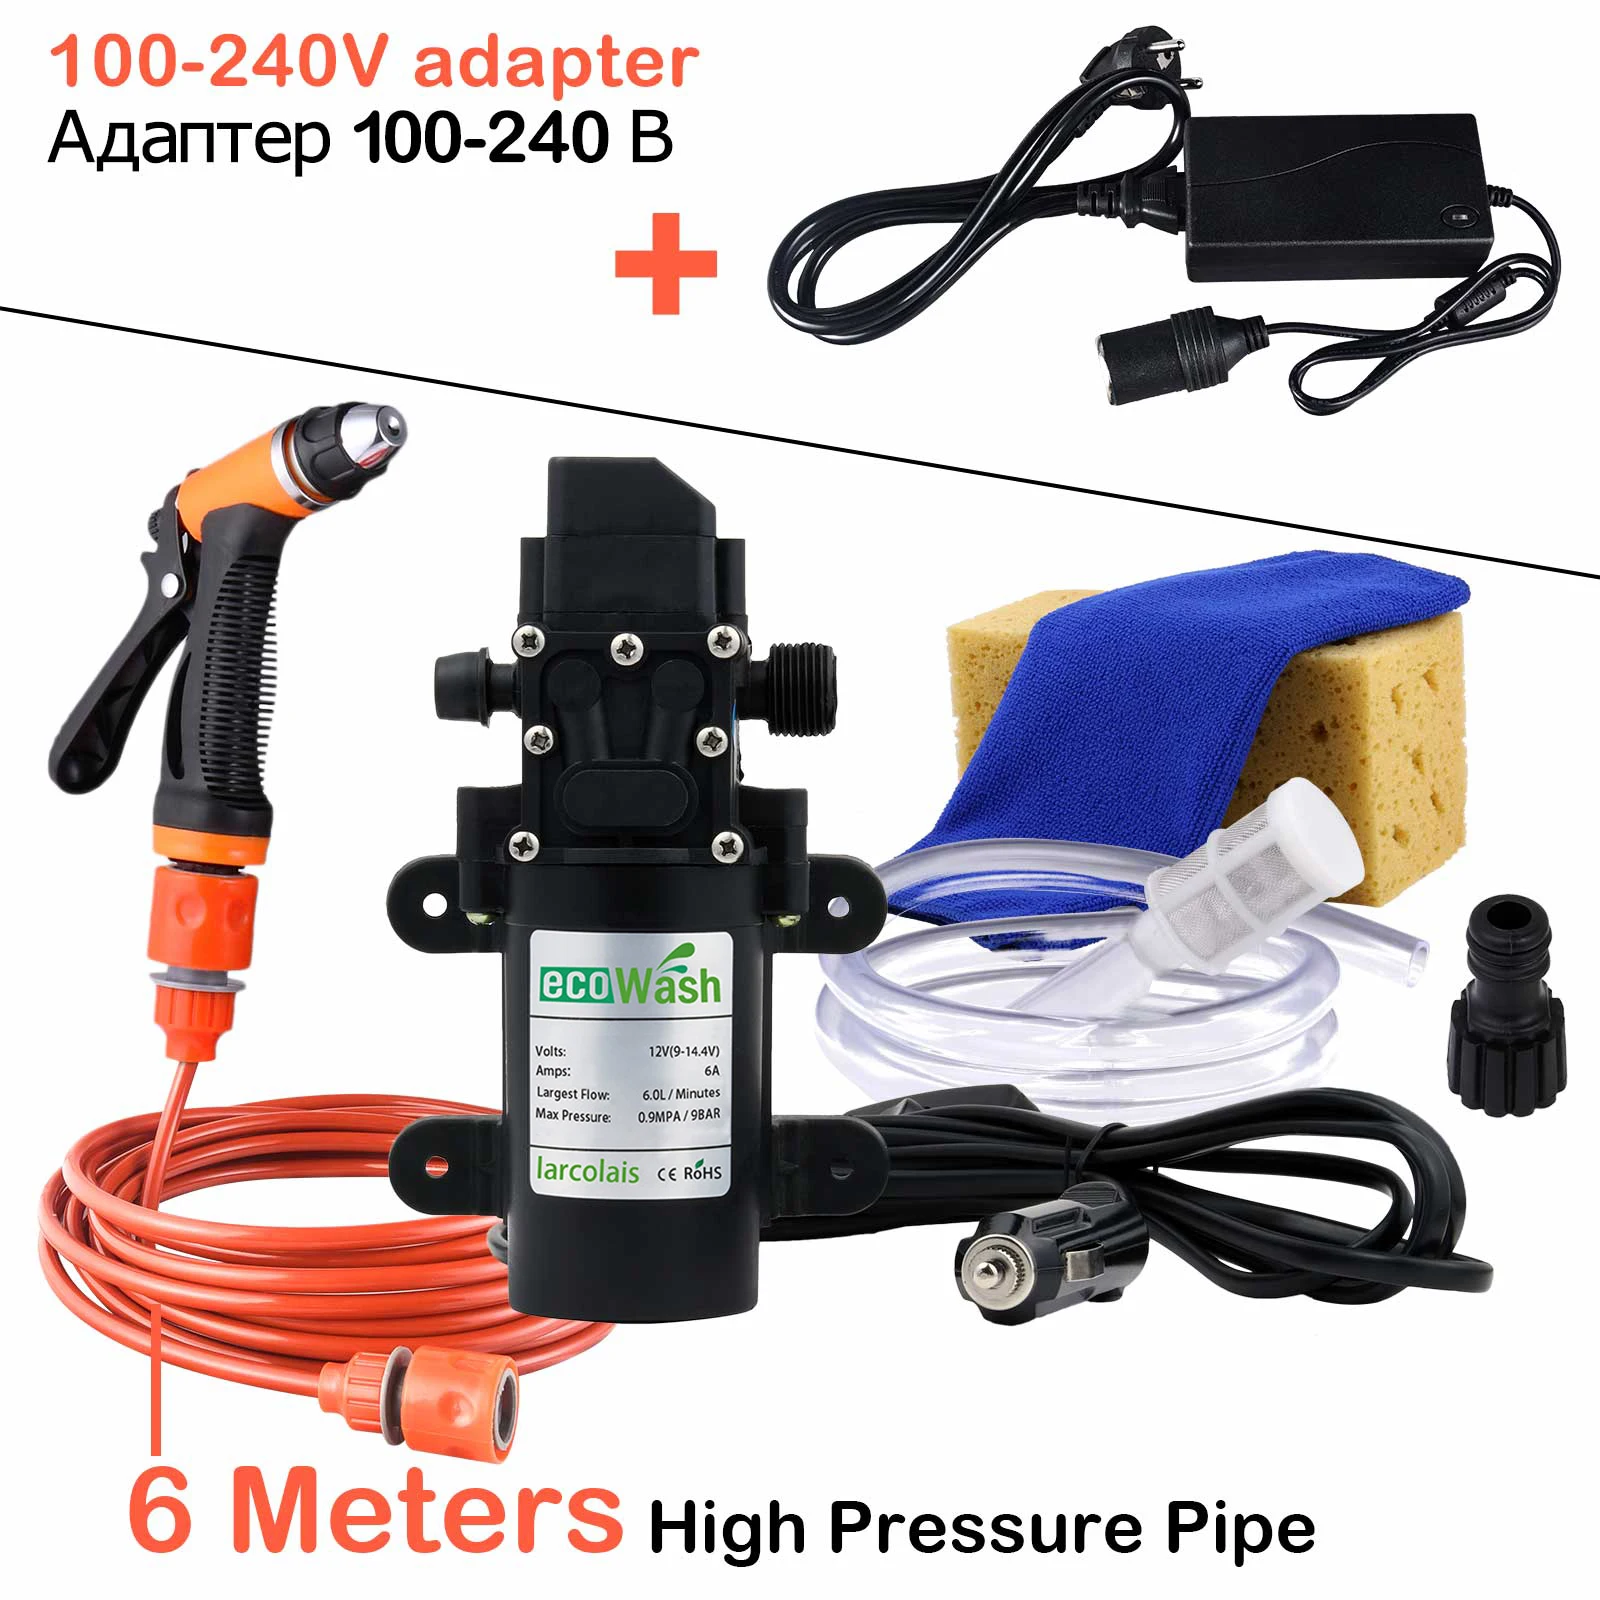 buy car washer Car Wash 12V Washer Car Gun Pump High Pressure Cleaner Car Care Portable Washing Machine Electric Cleaning Auto Device best car washing machine Car Washing Tools